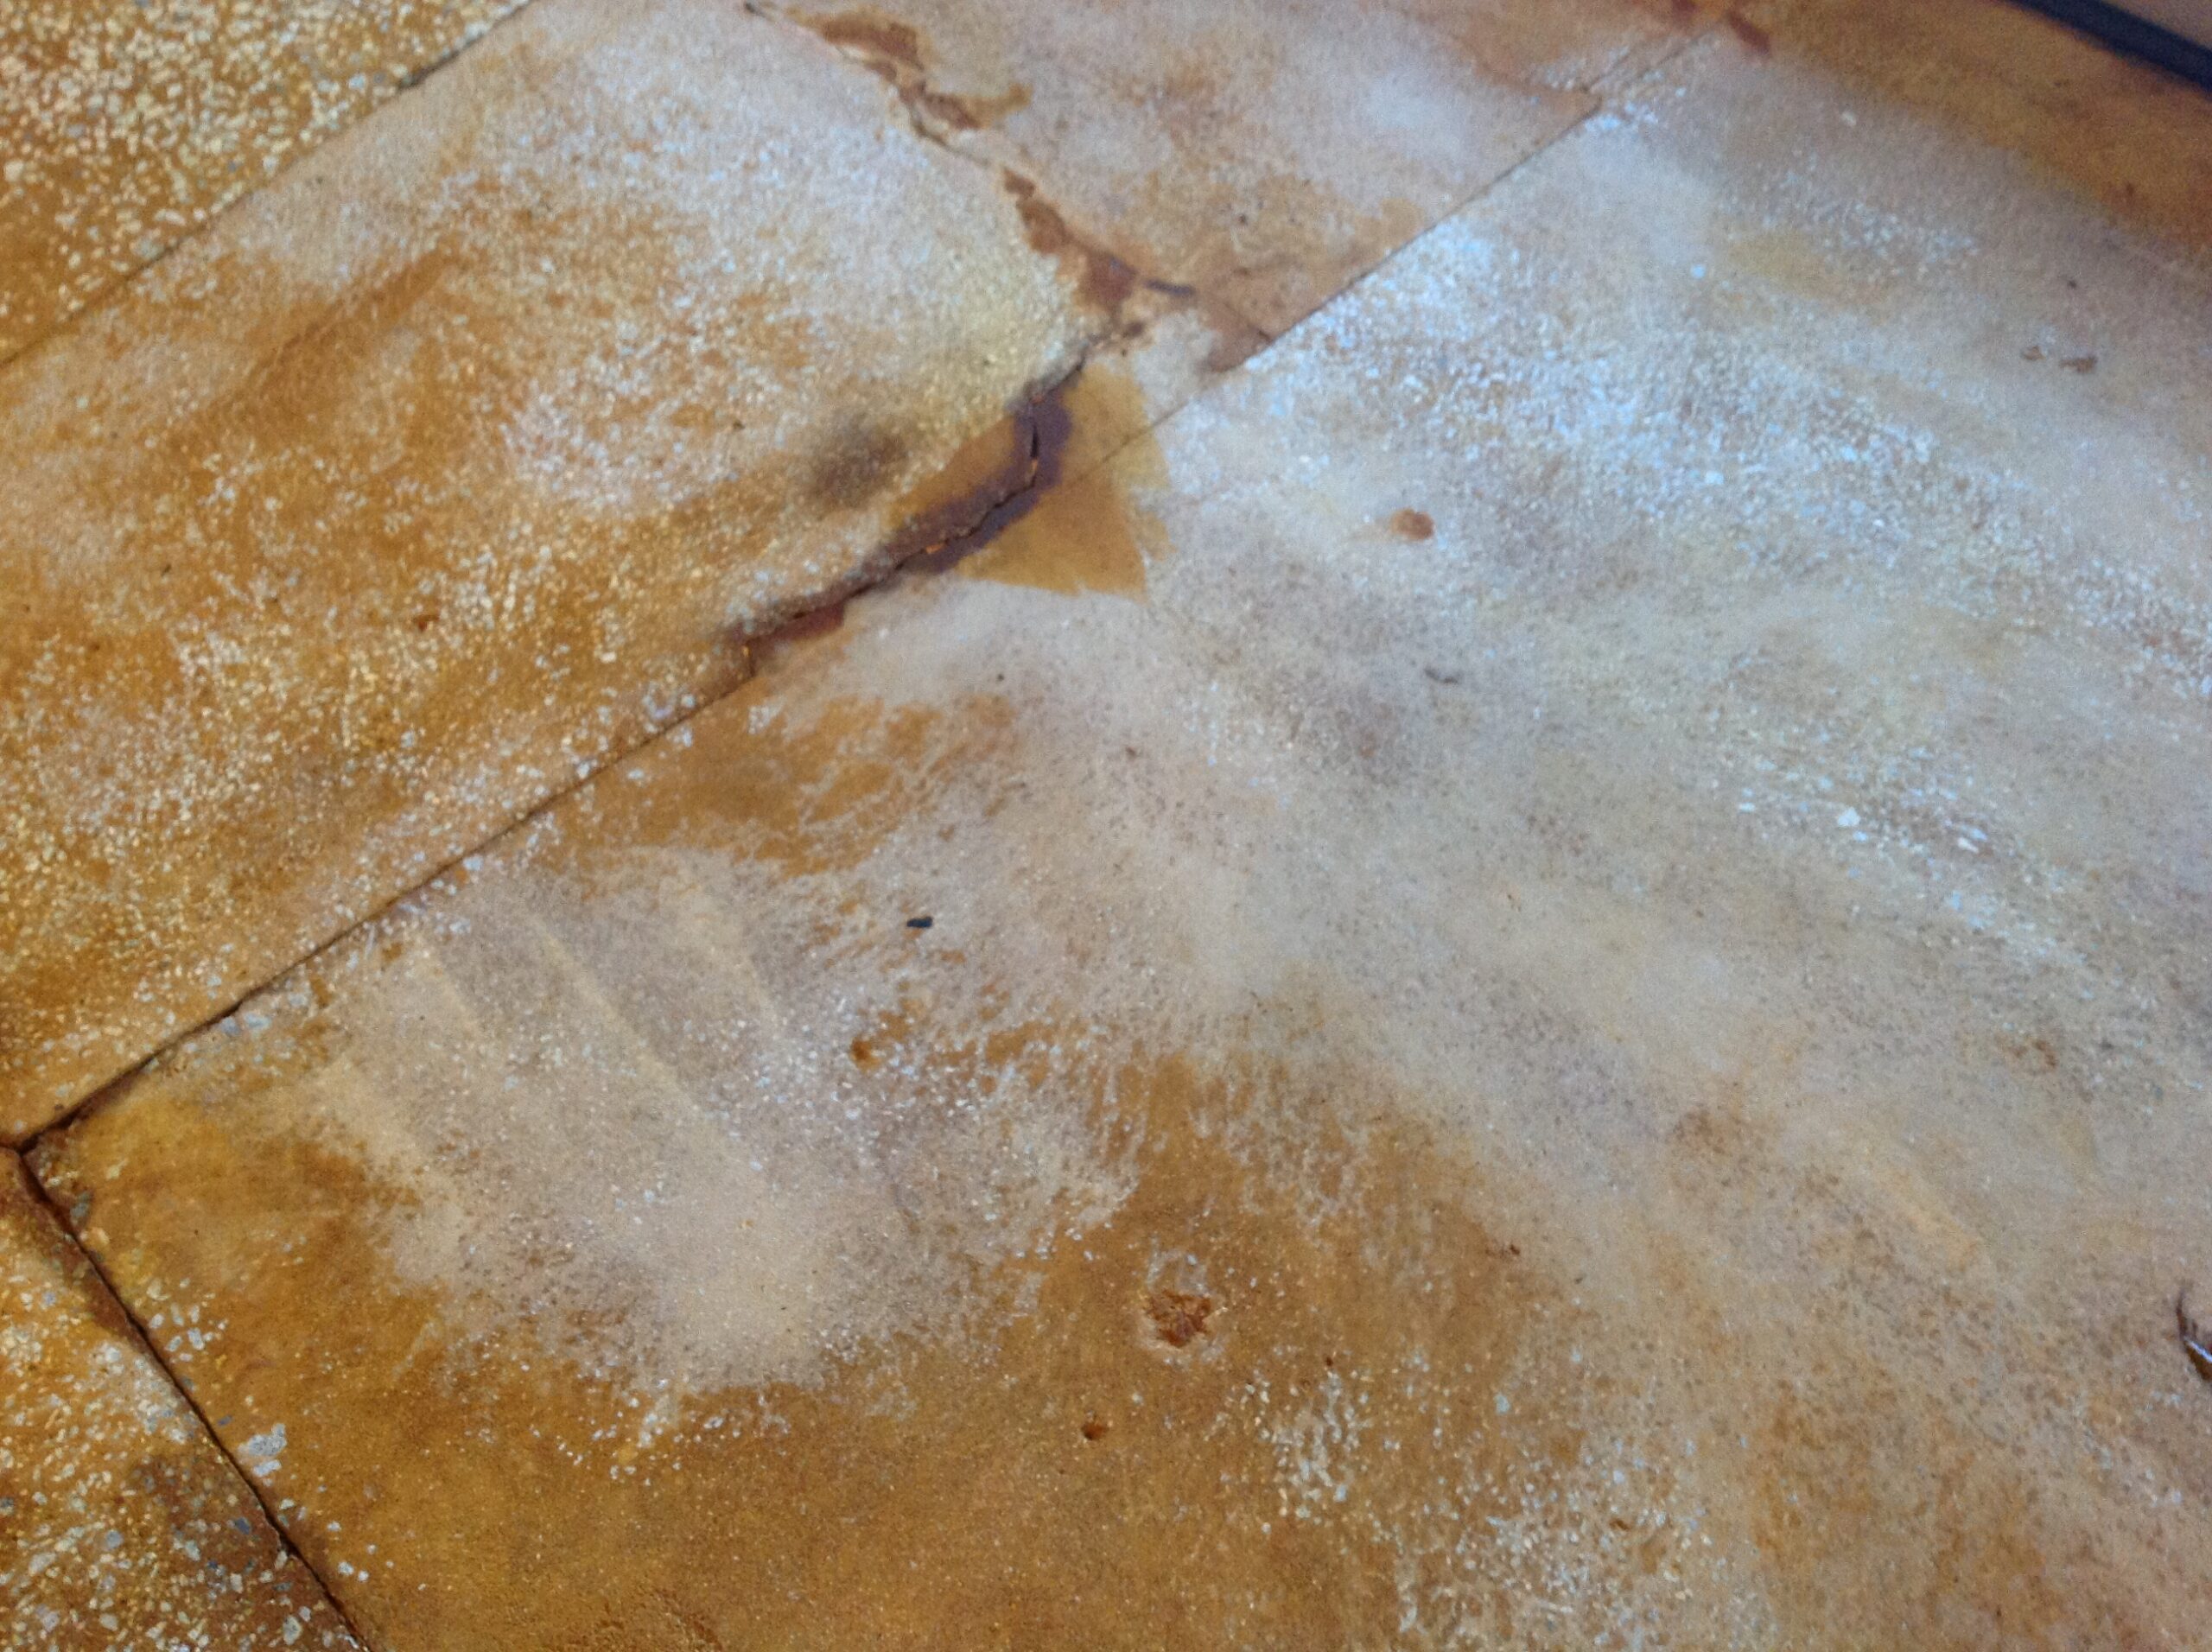 Image of the faded, aged concrete floor with white spots, before treatmen